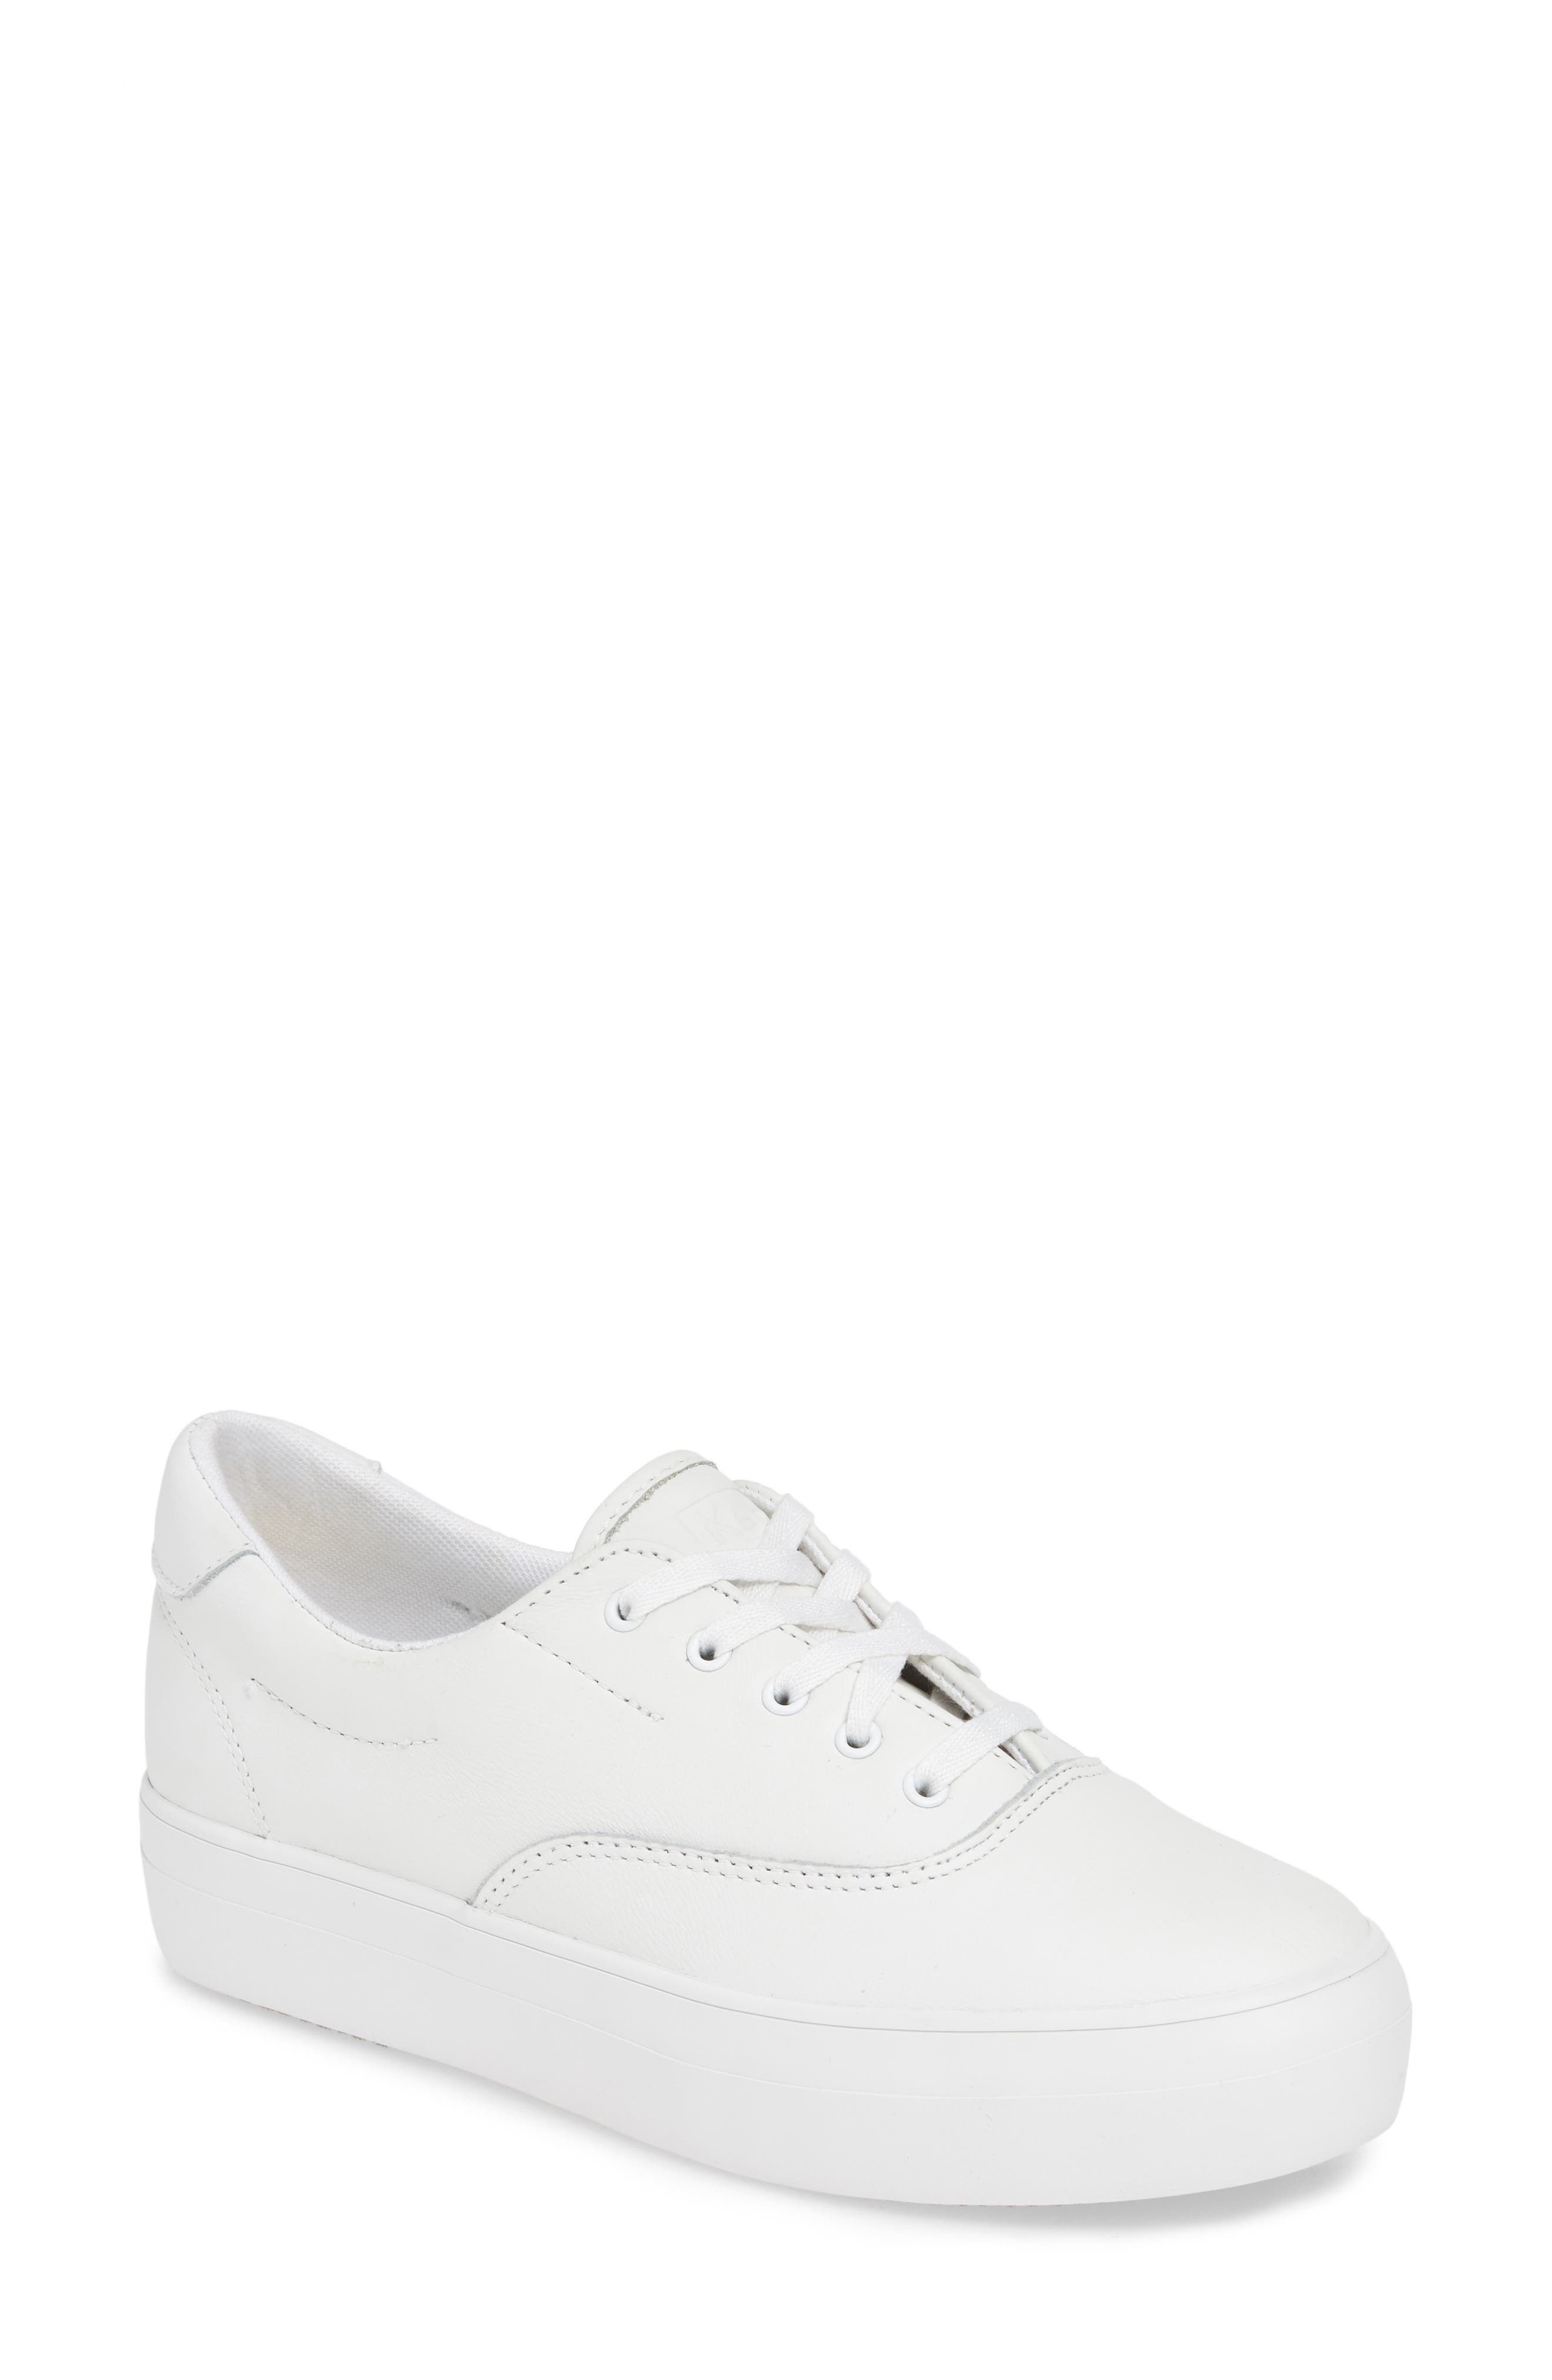 keds rise leather sneaker